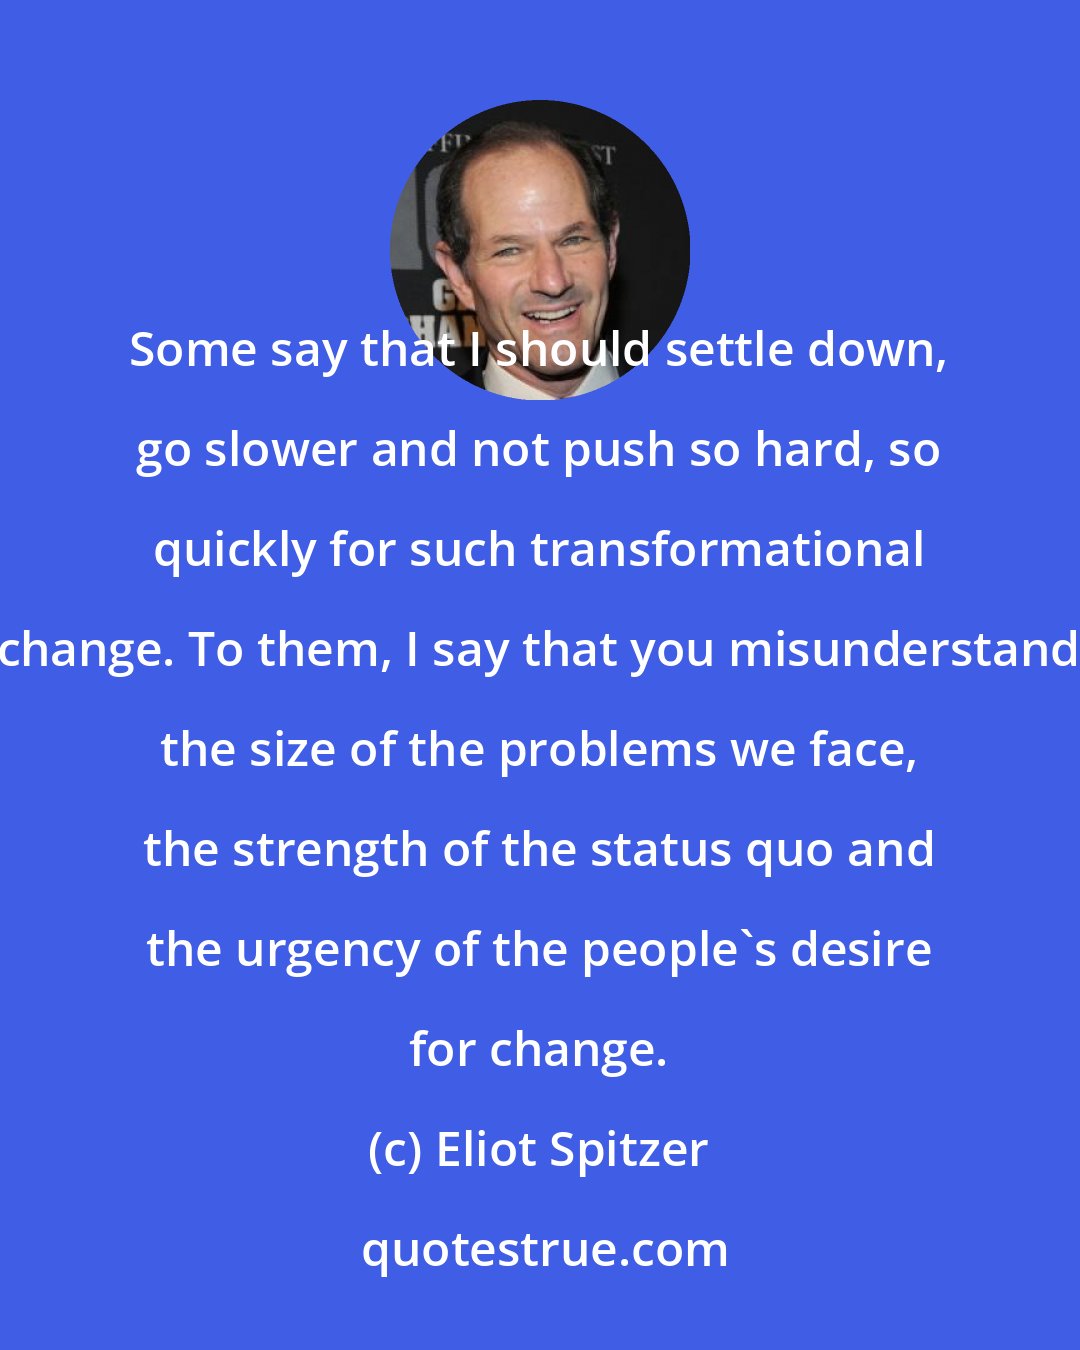 Eliot Spitzer: Some say that I should settle down, go slower and not push so hard, so quickly for such transformational change. To them, I say that you misunderstand the size of the problems we face, the strength of the status quo and the urgency of the people's desire for change.